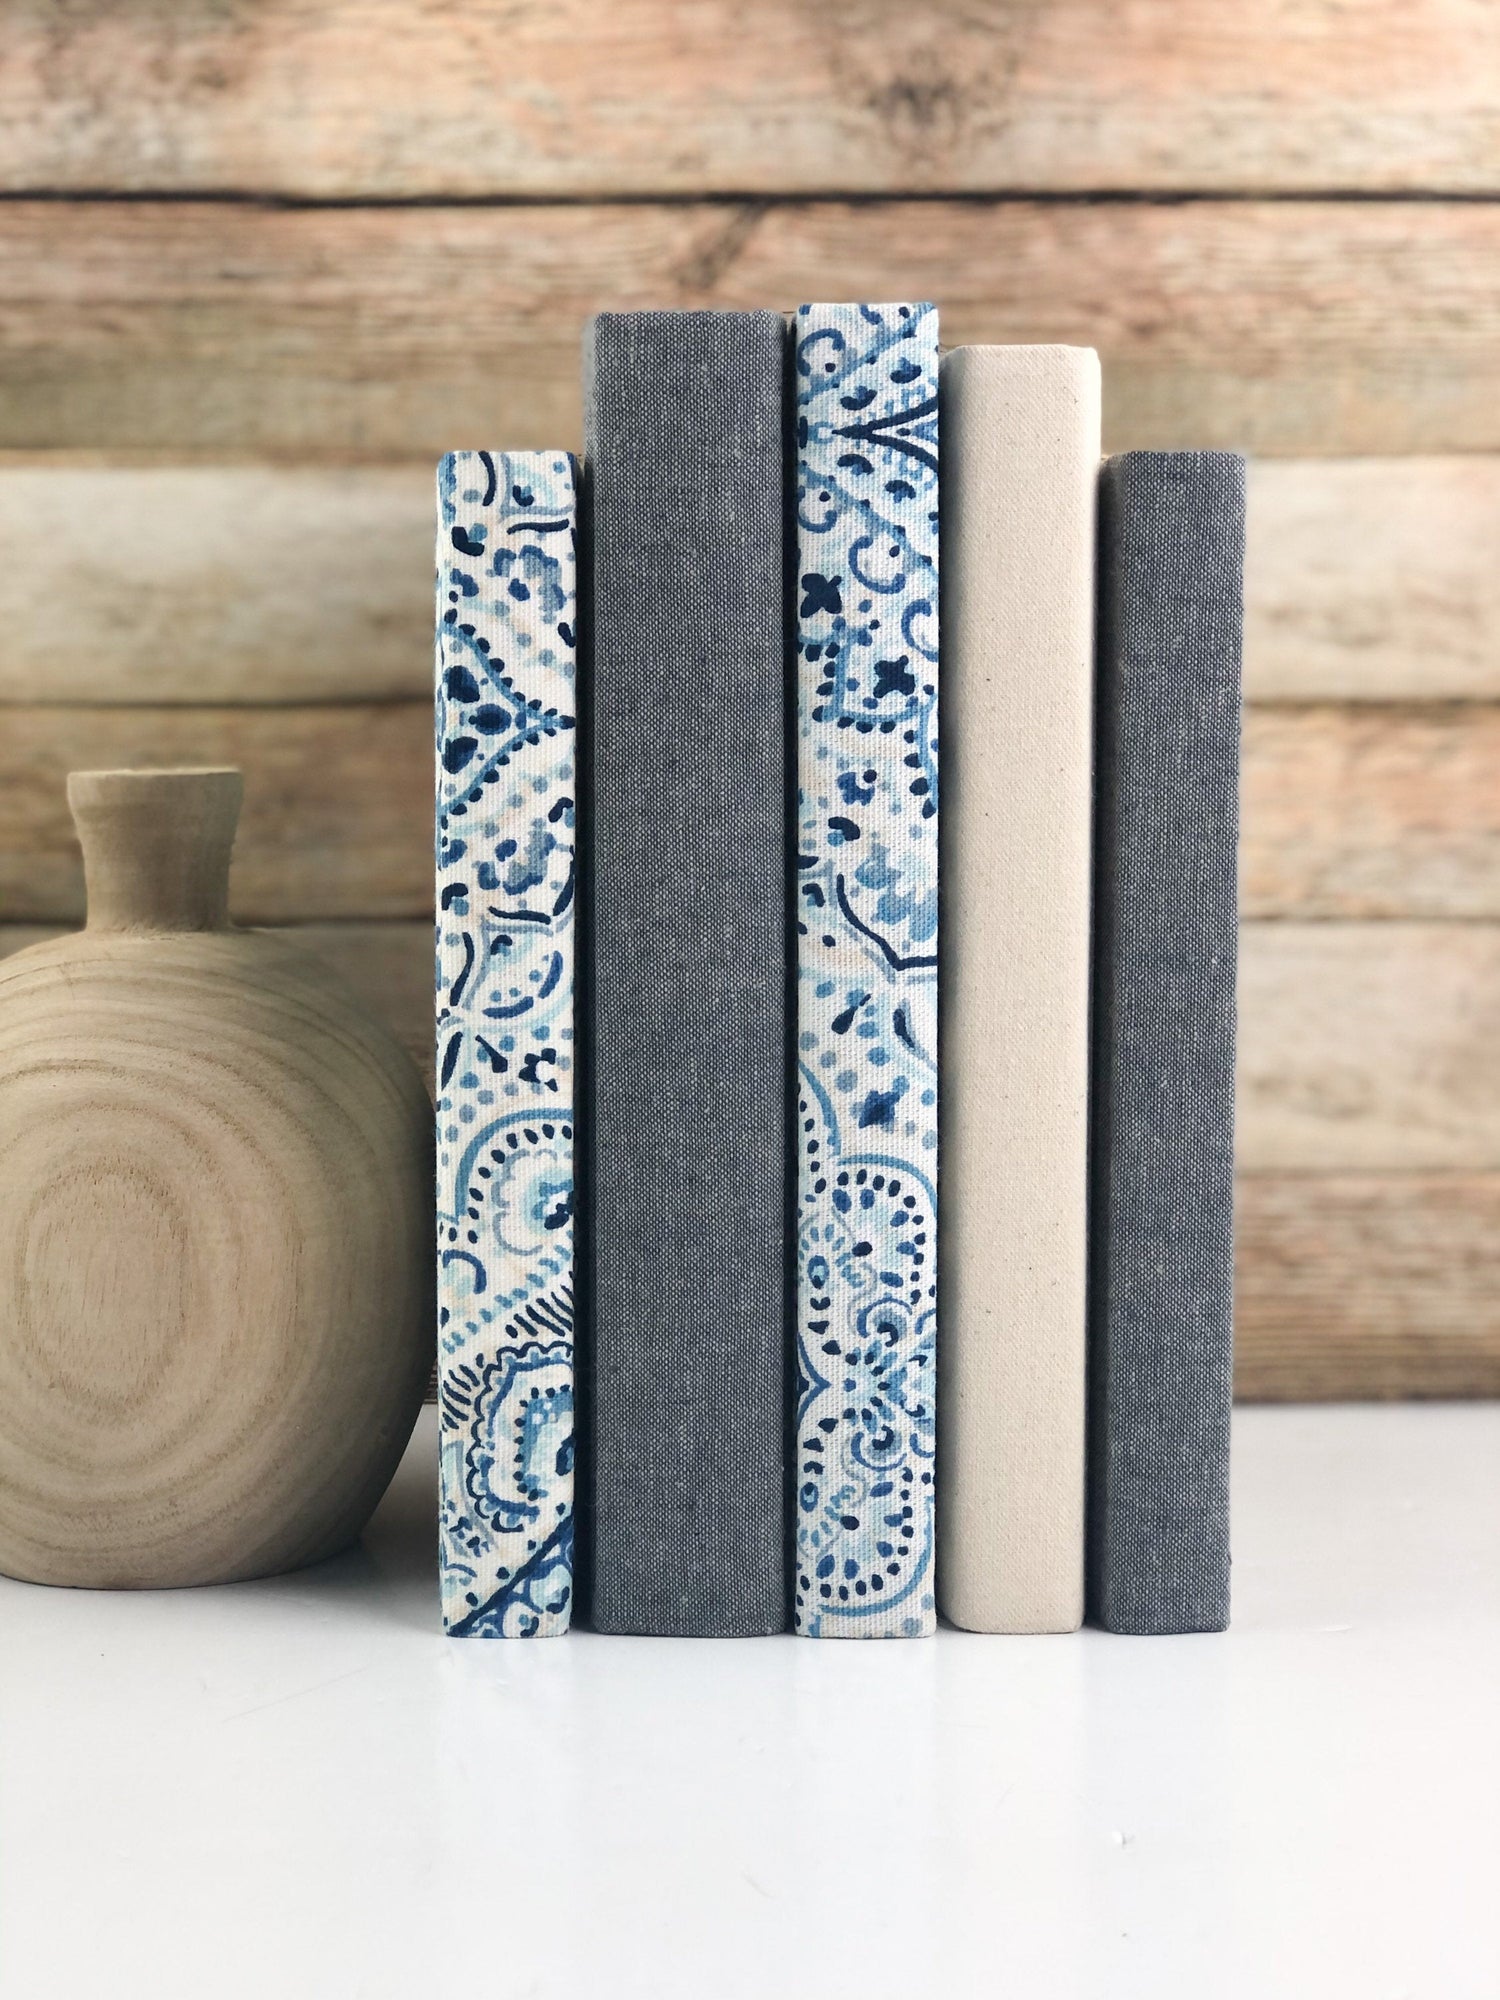 Blue Fabric Covered Books